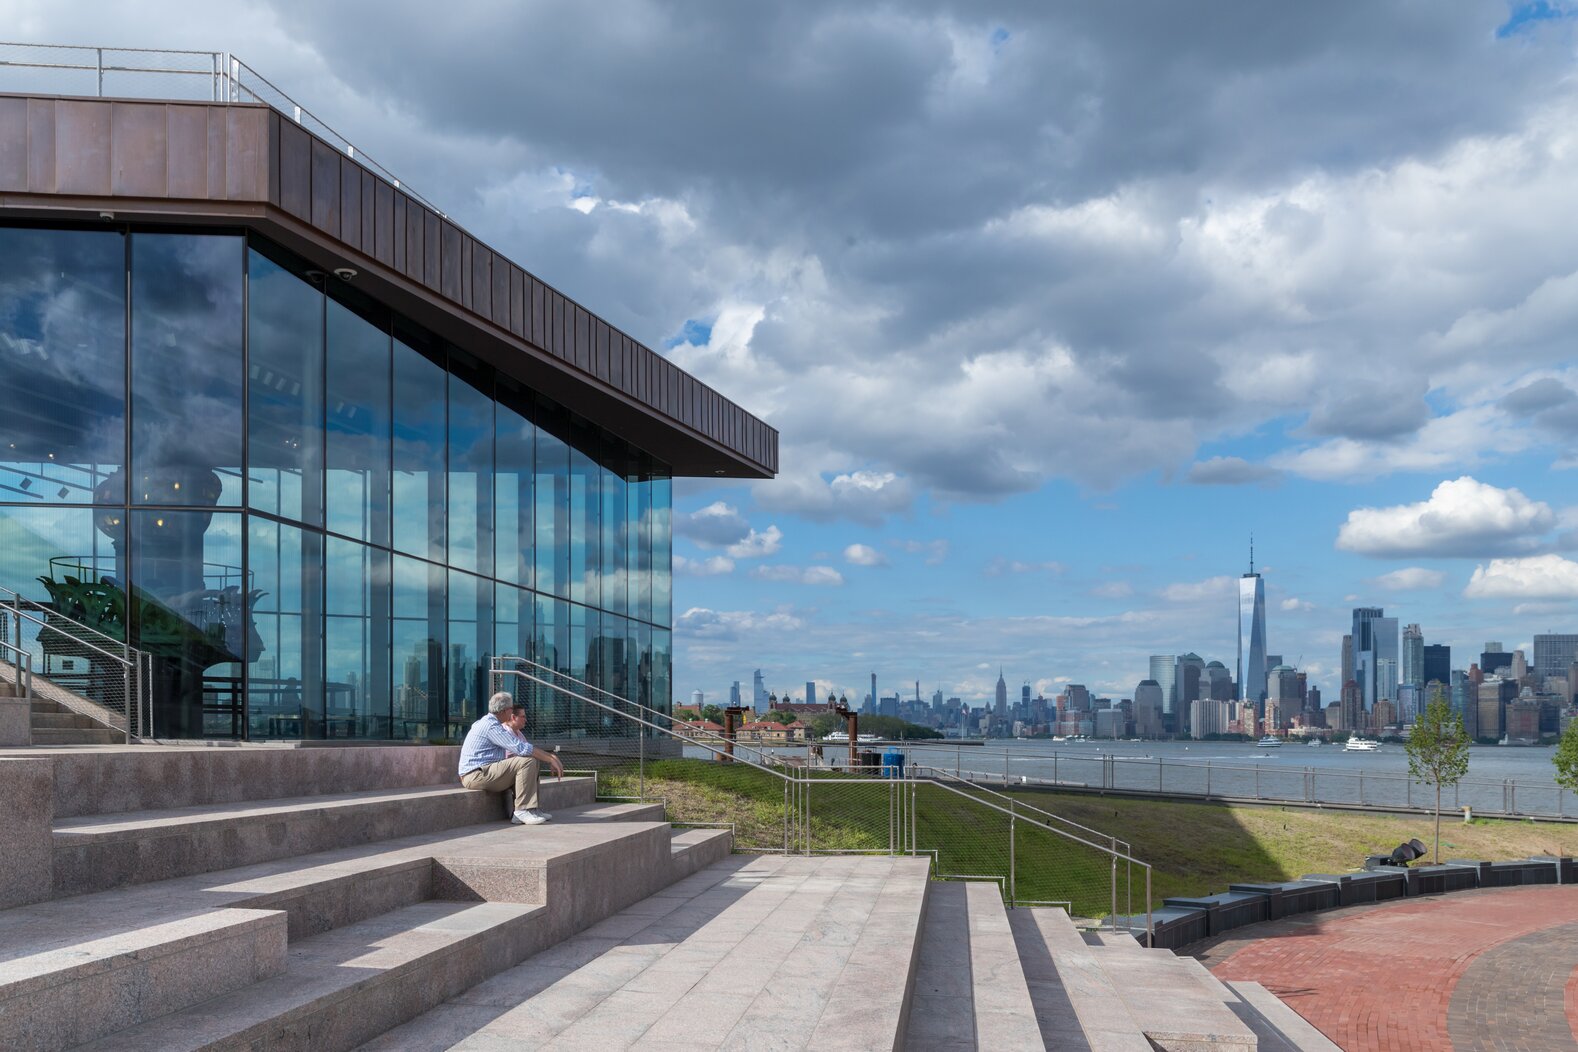 The Statue of Liberty Museum, designed by FXCollaborative and completed in 2019, employs low-reflective, insulated glass with an original frit pattern to deter bird collisions. Photo: Iwan Baan, courtesy of FXCollaborative